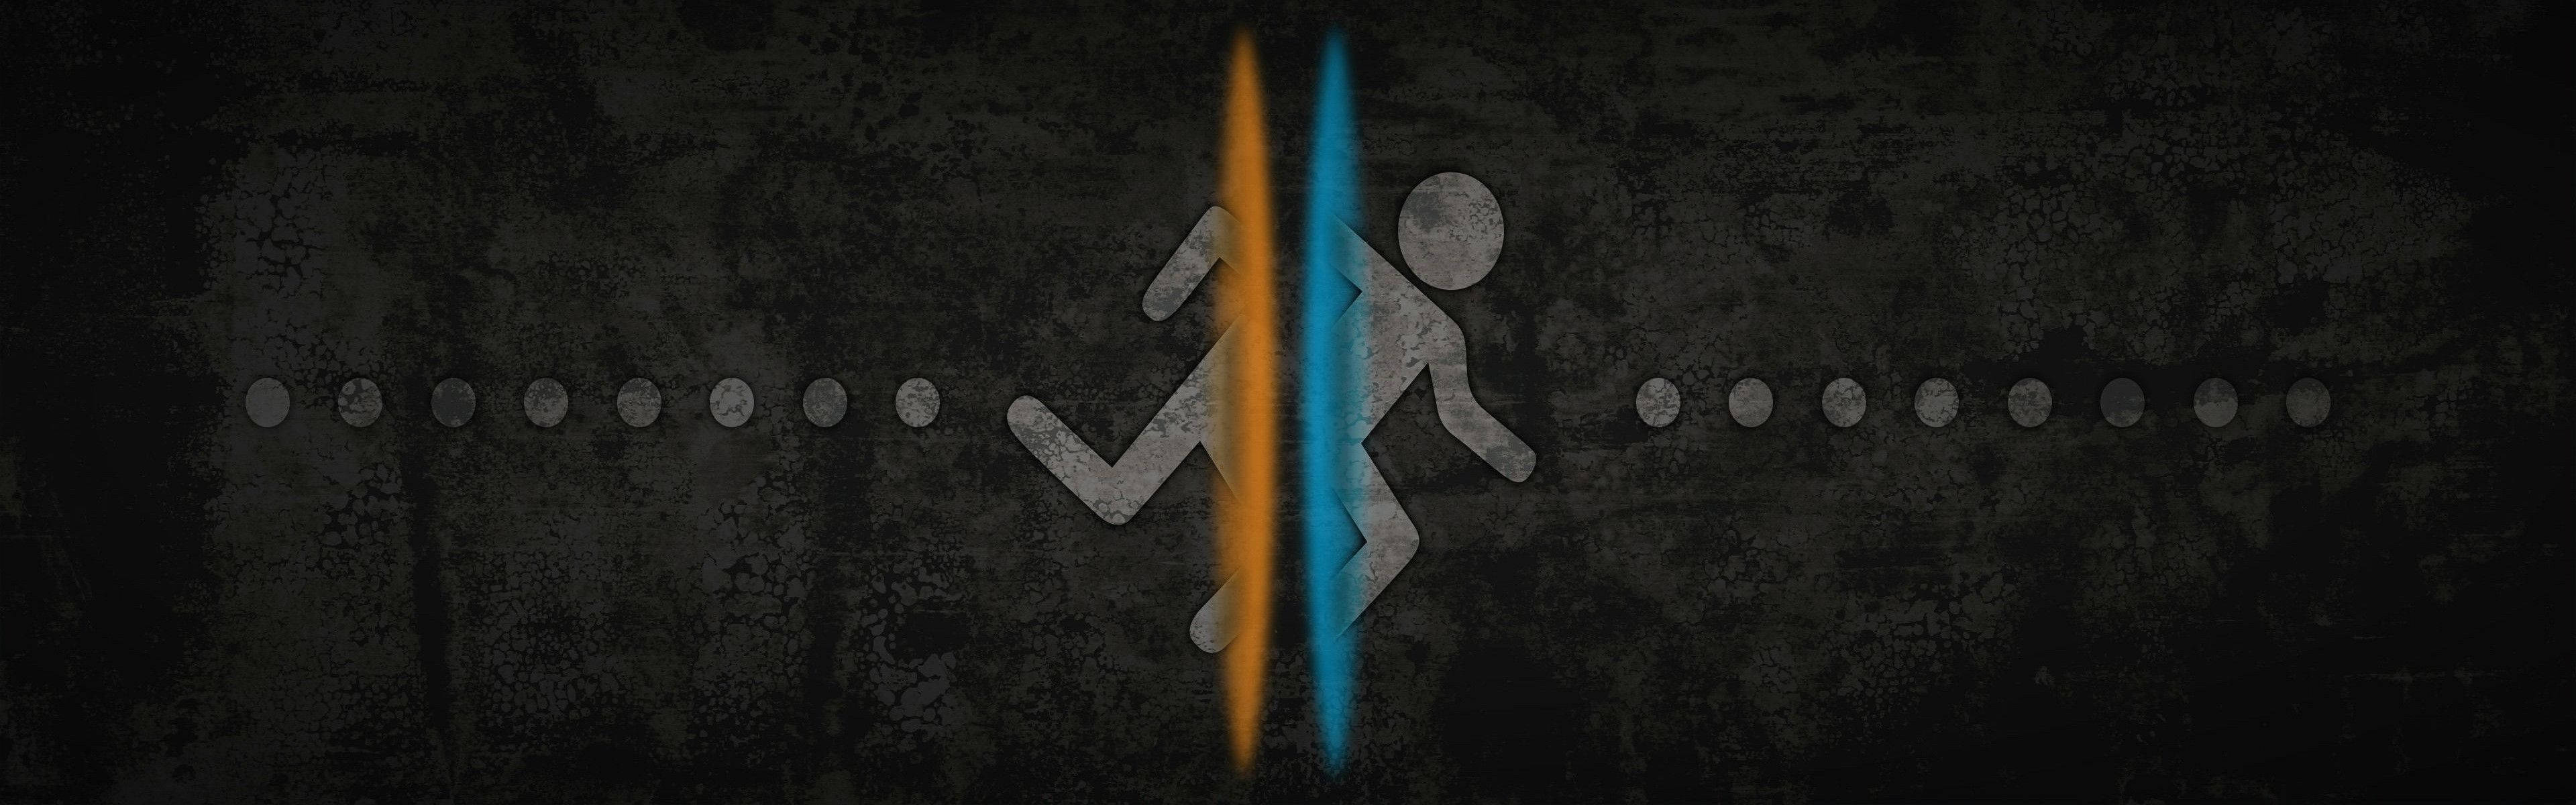 A Black And Blue Logo With A Man Running Wallpaper